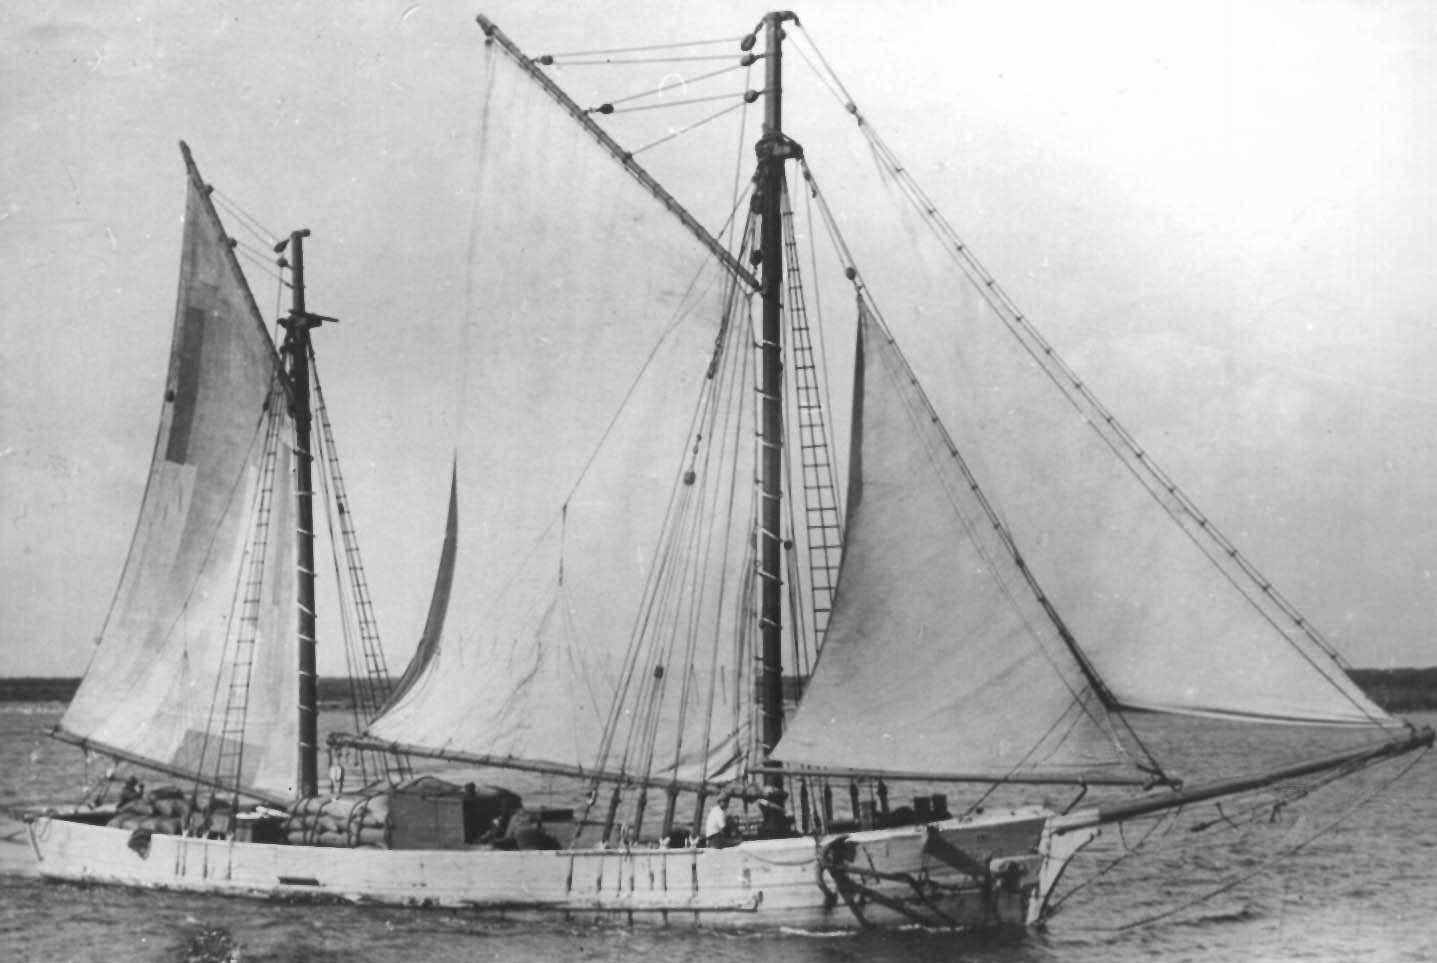 Ketch built in 1864 in Franklin, Tasmania.
This image shows vessel loaded with bags of cargo.